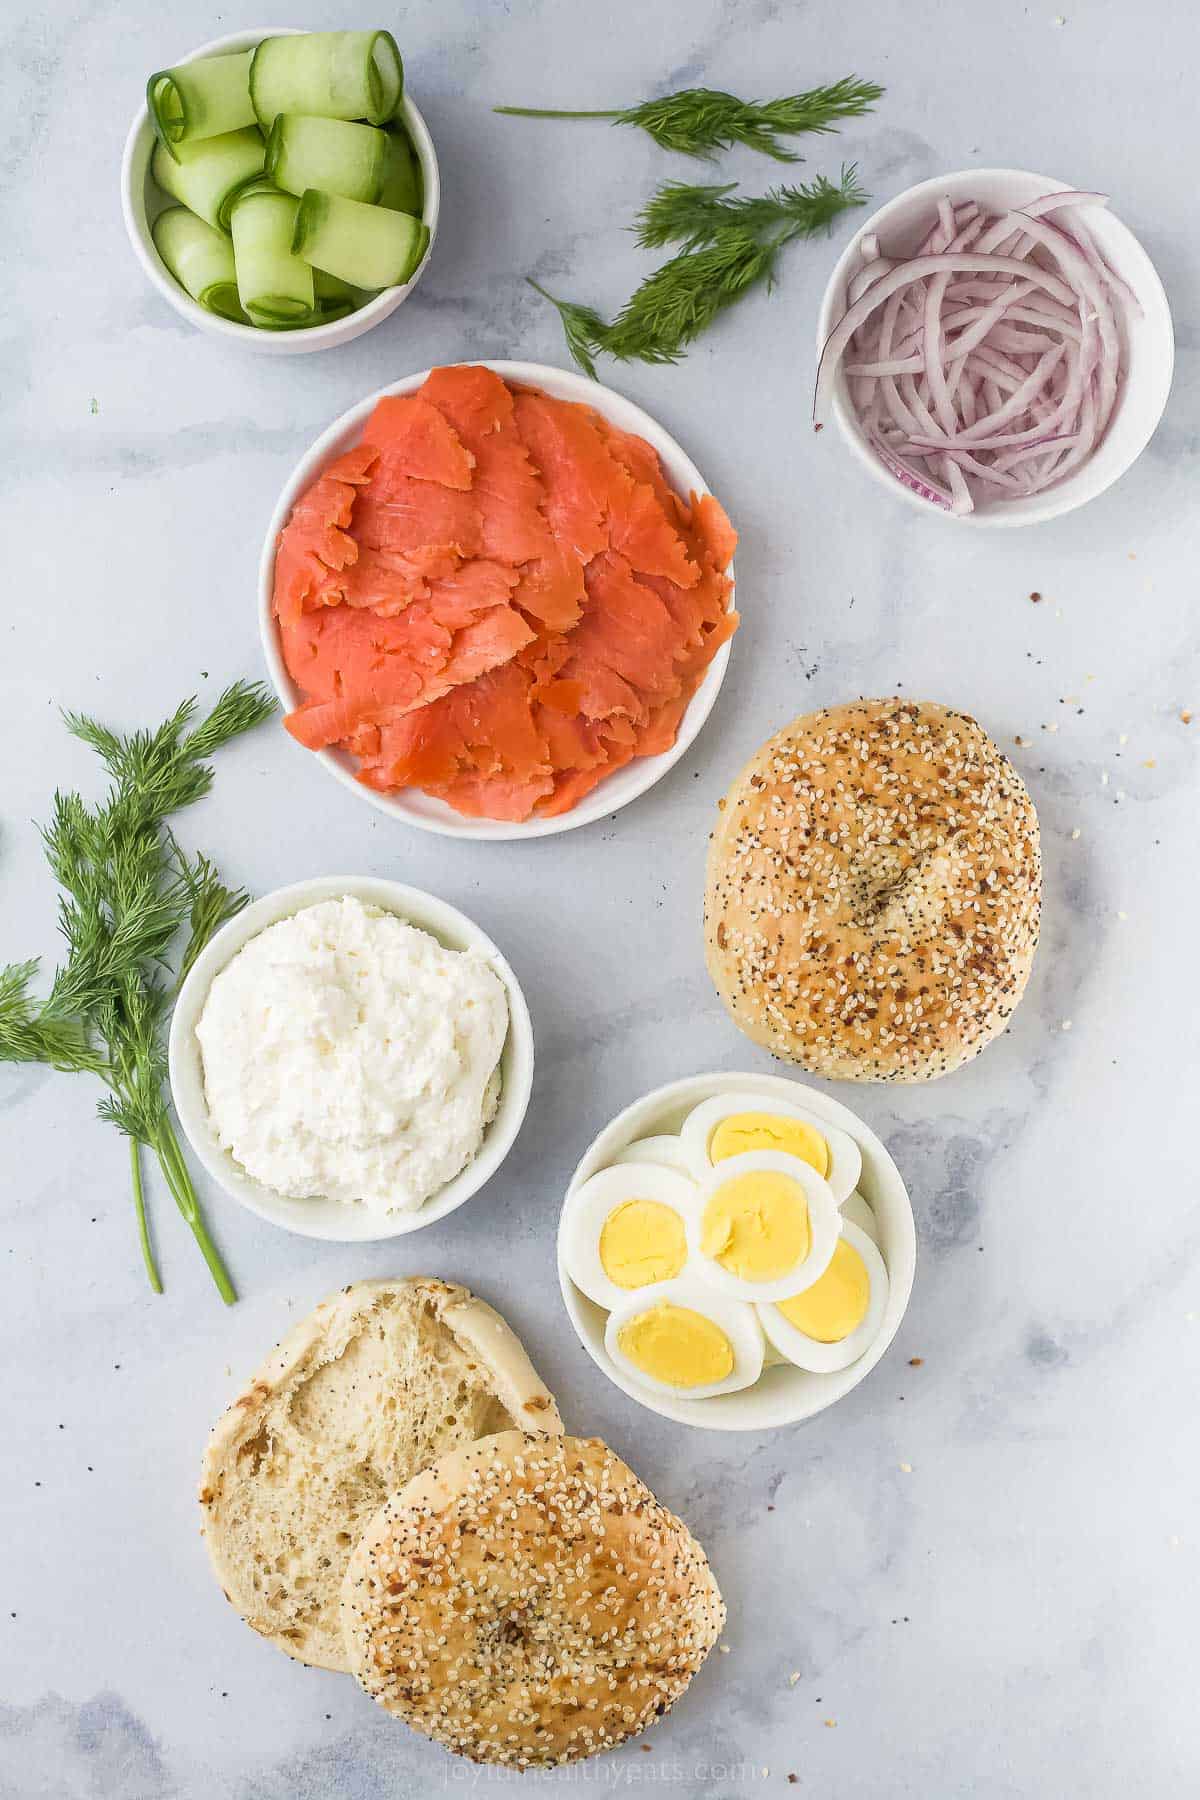 Ingredients for bagel and lox.